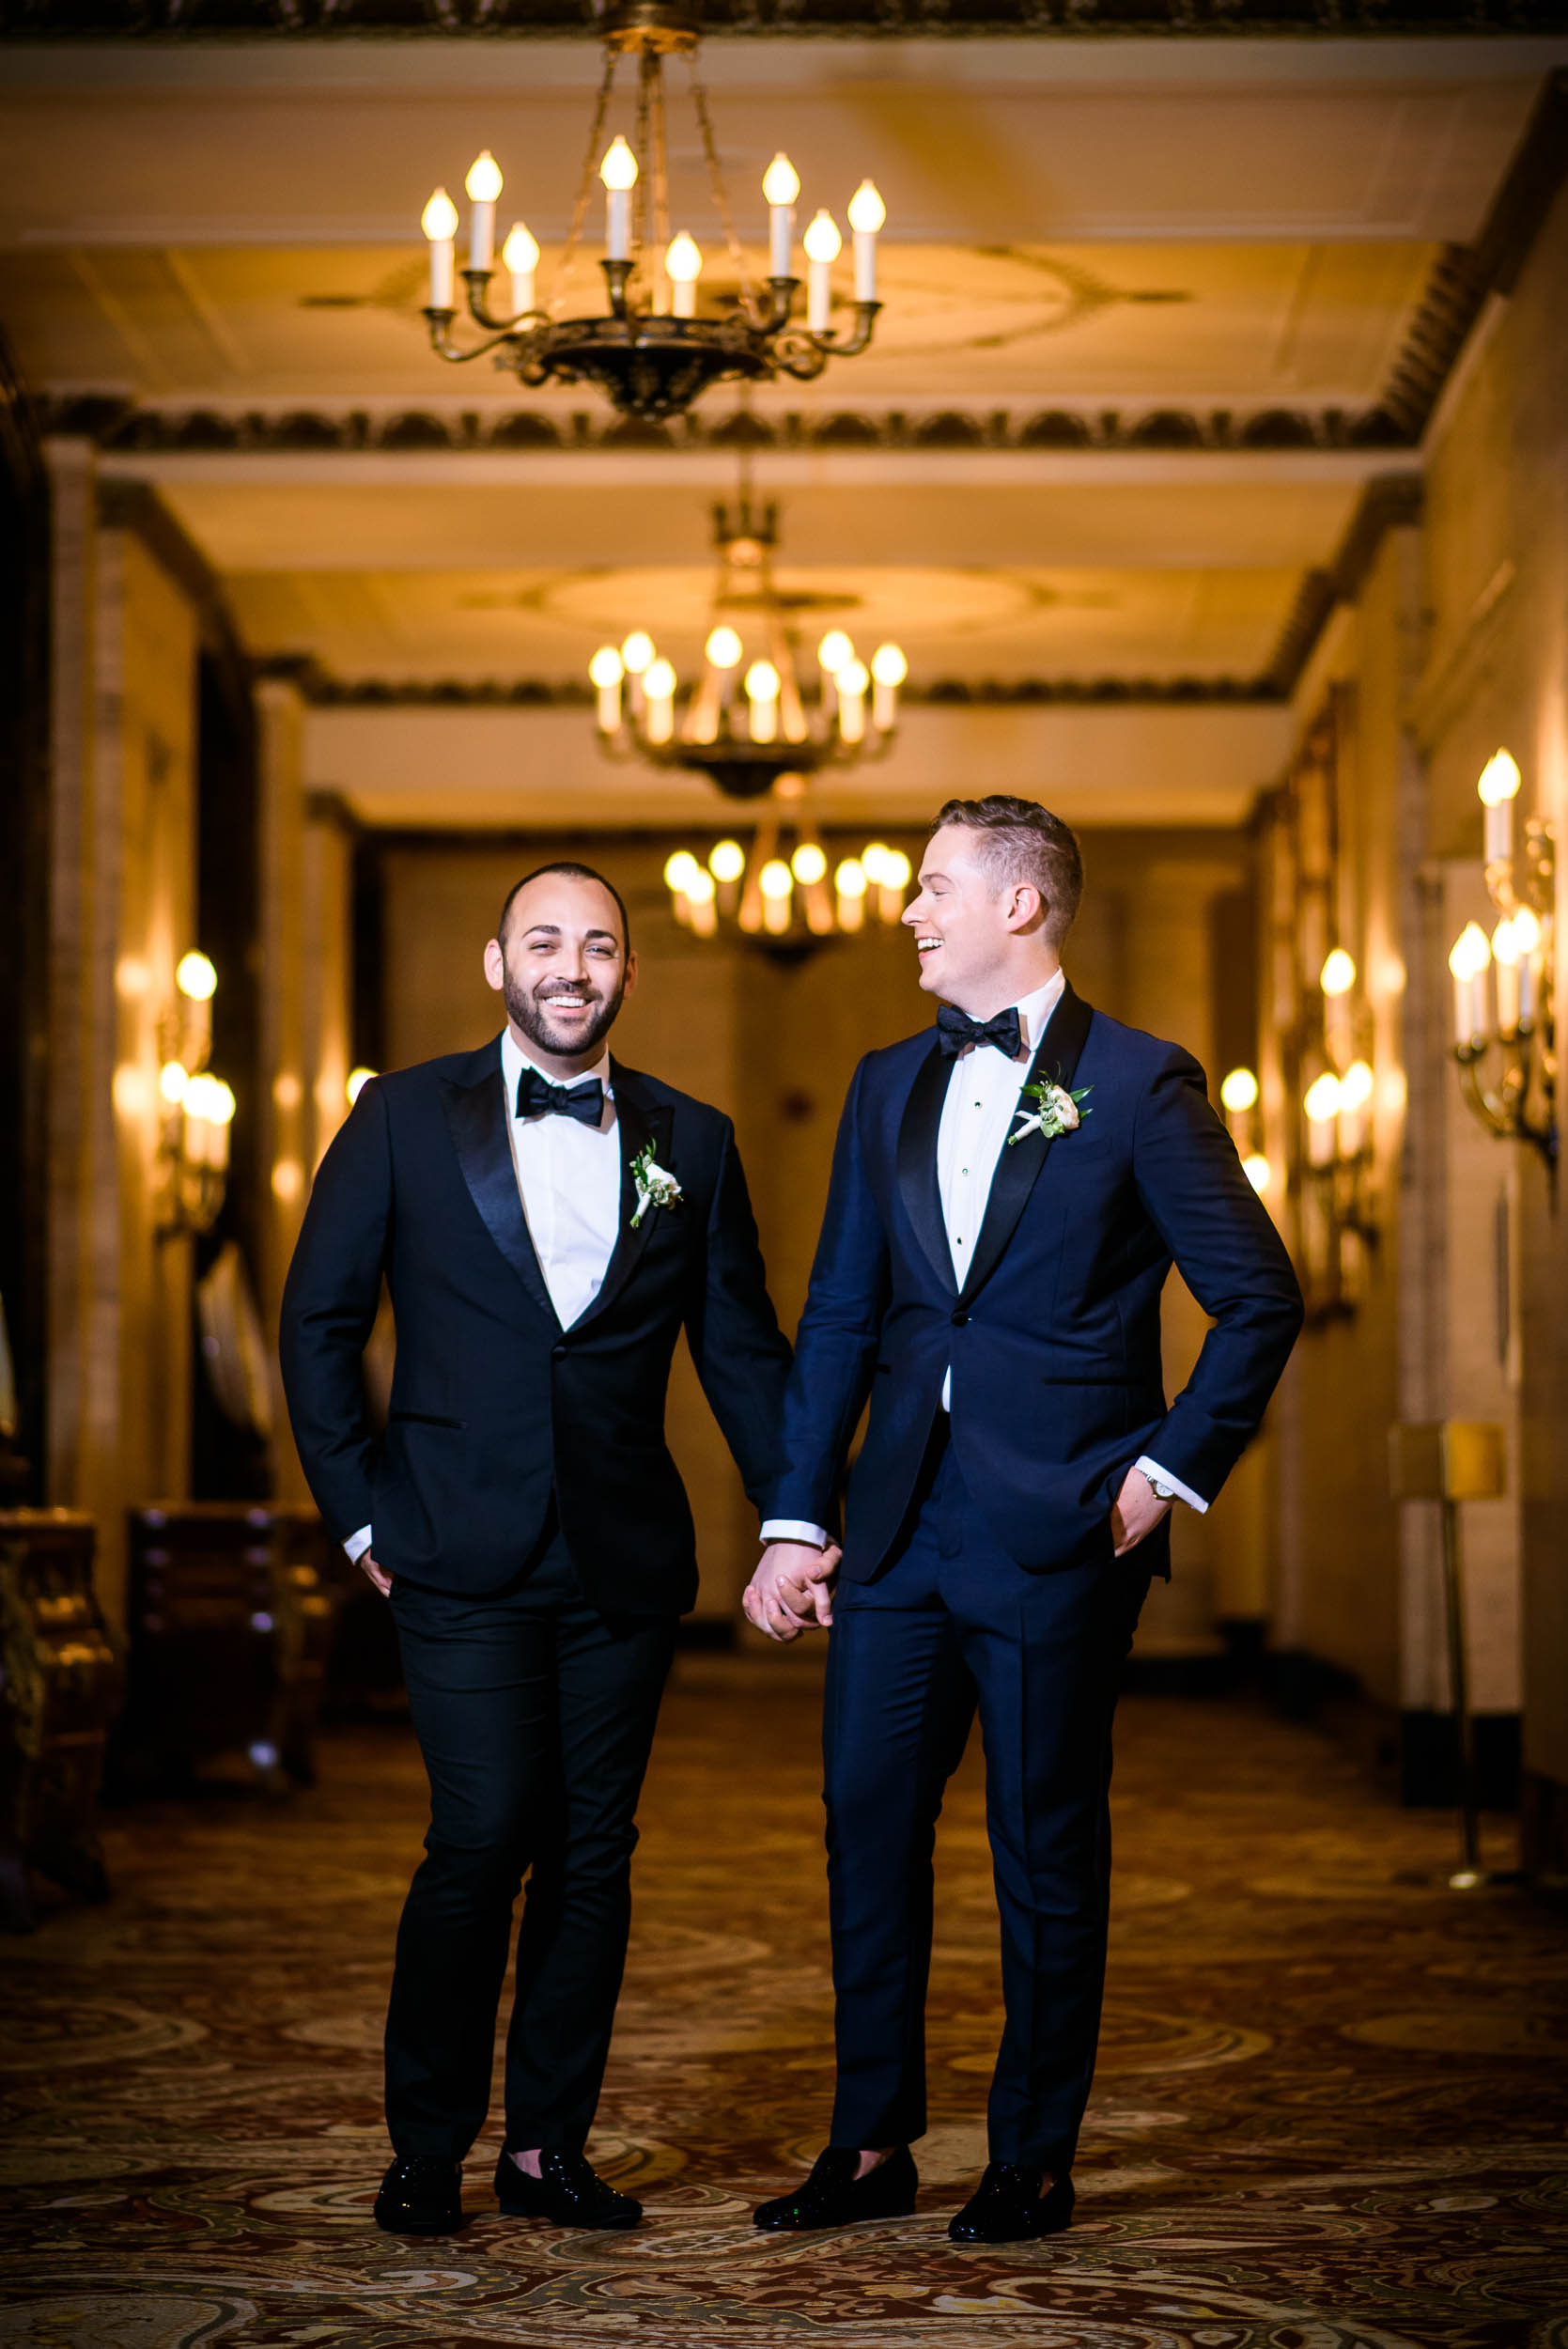 Trendy grooms attire for luxurious fall wedding at the Chicago Symphony Center captured by J. Brown Photography. See more wedding ideas at jbrownphotography.com!